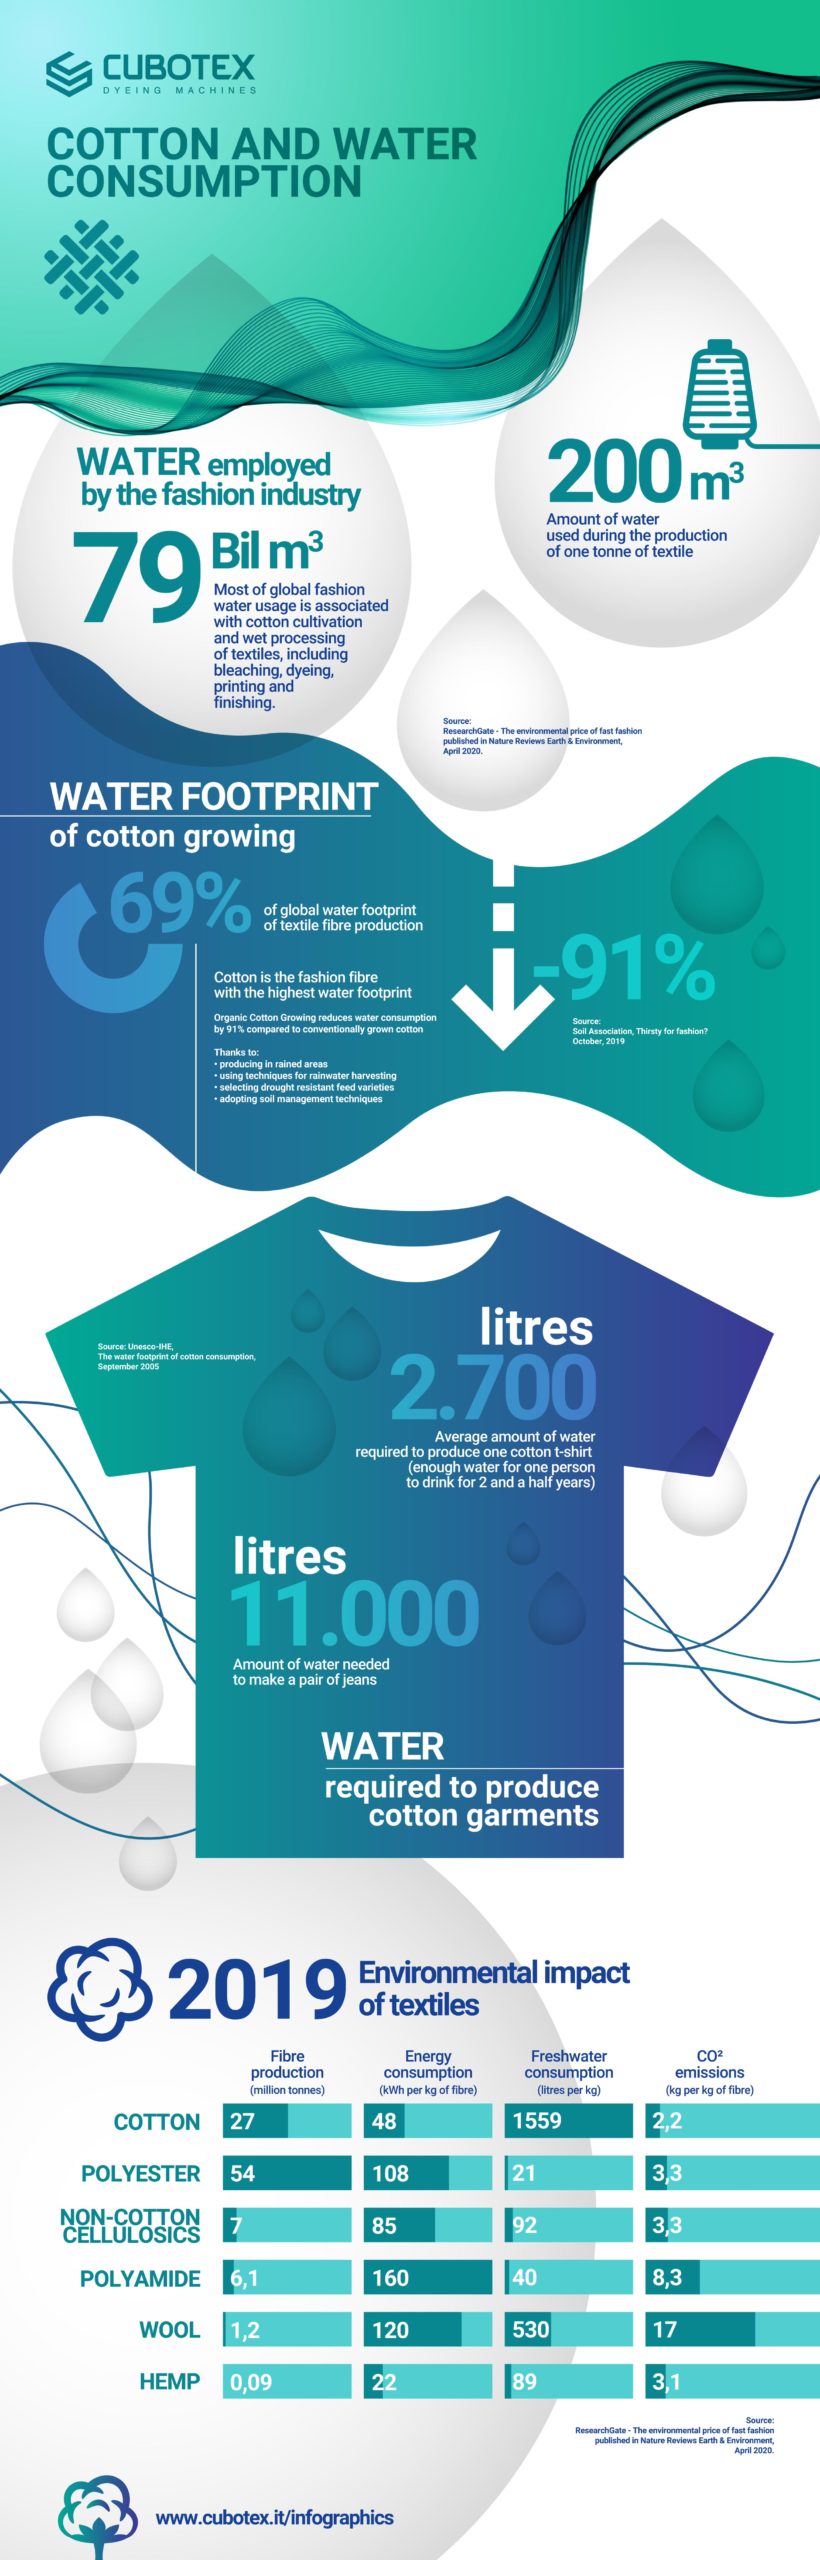 Cubotex - Cotton and water consumption - Infographic (JPG)